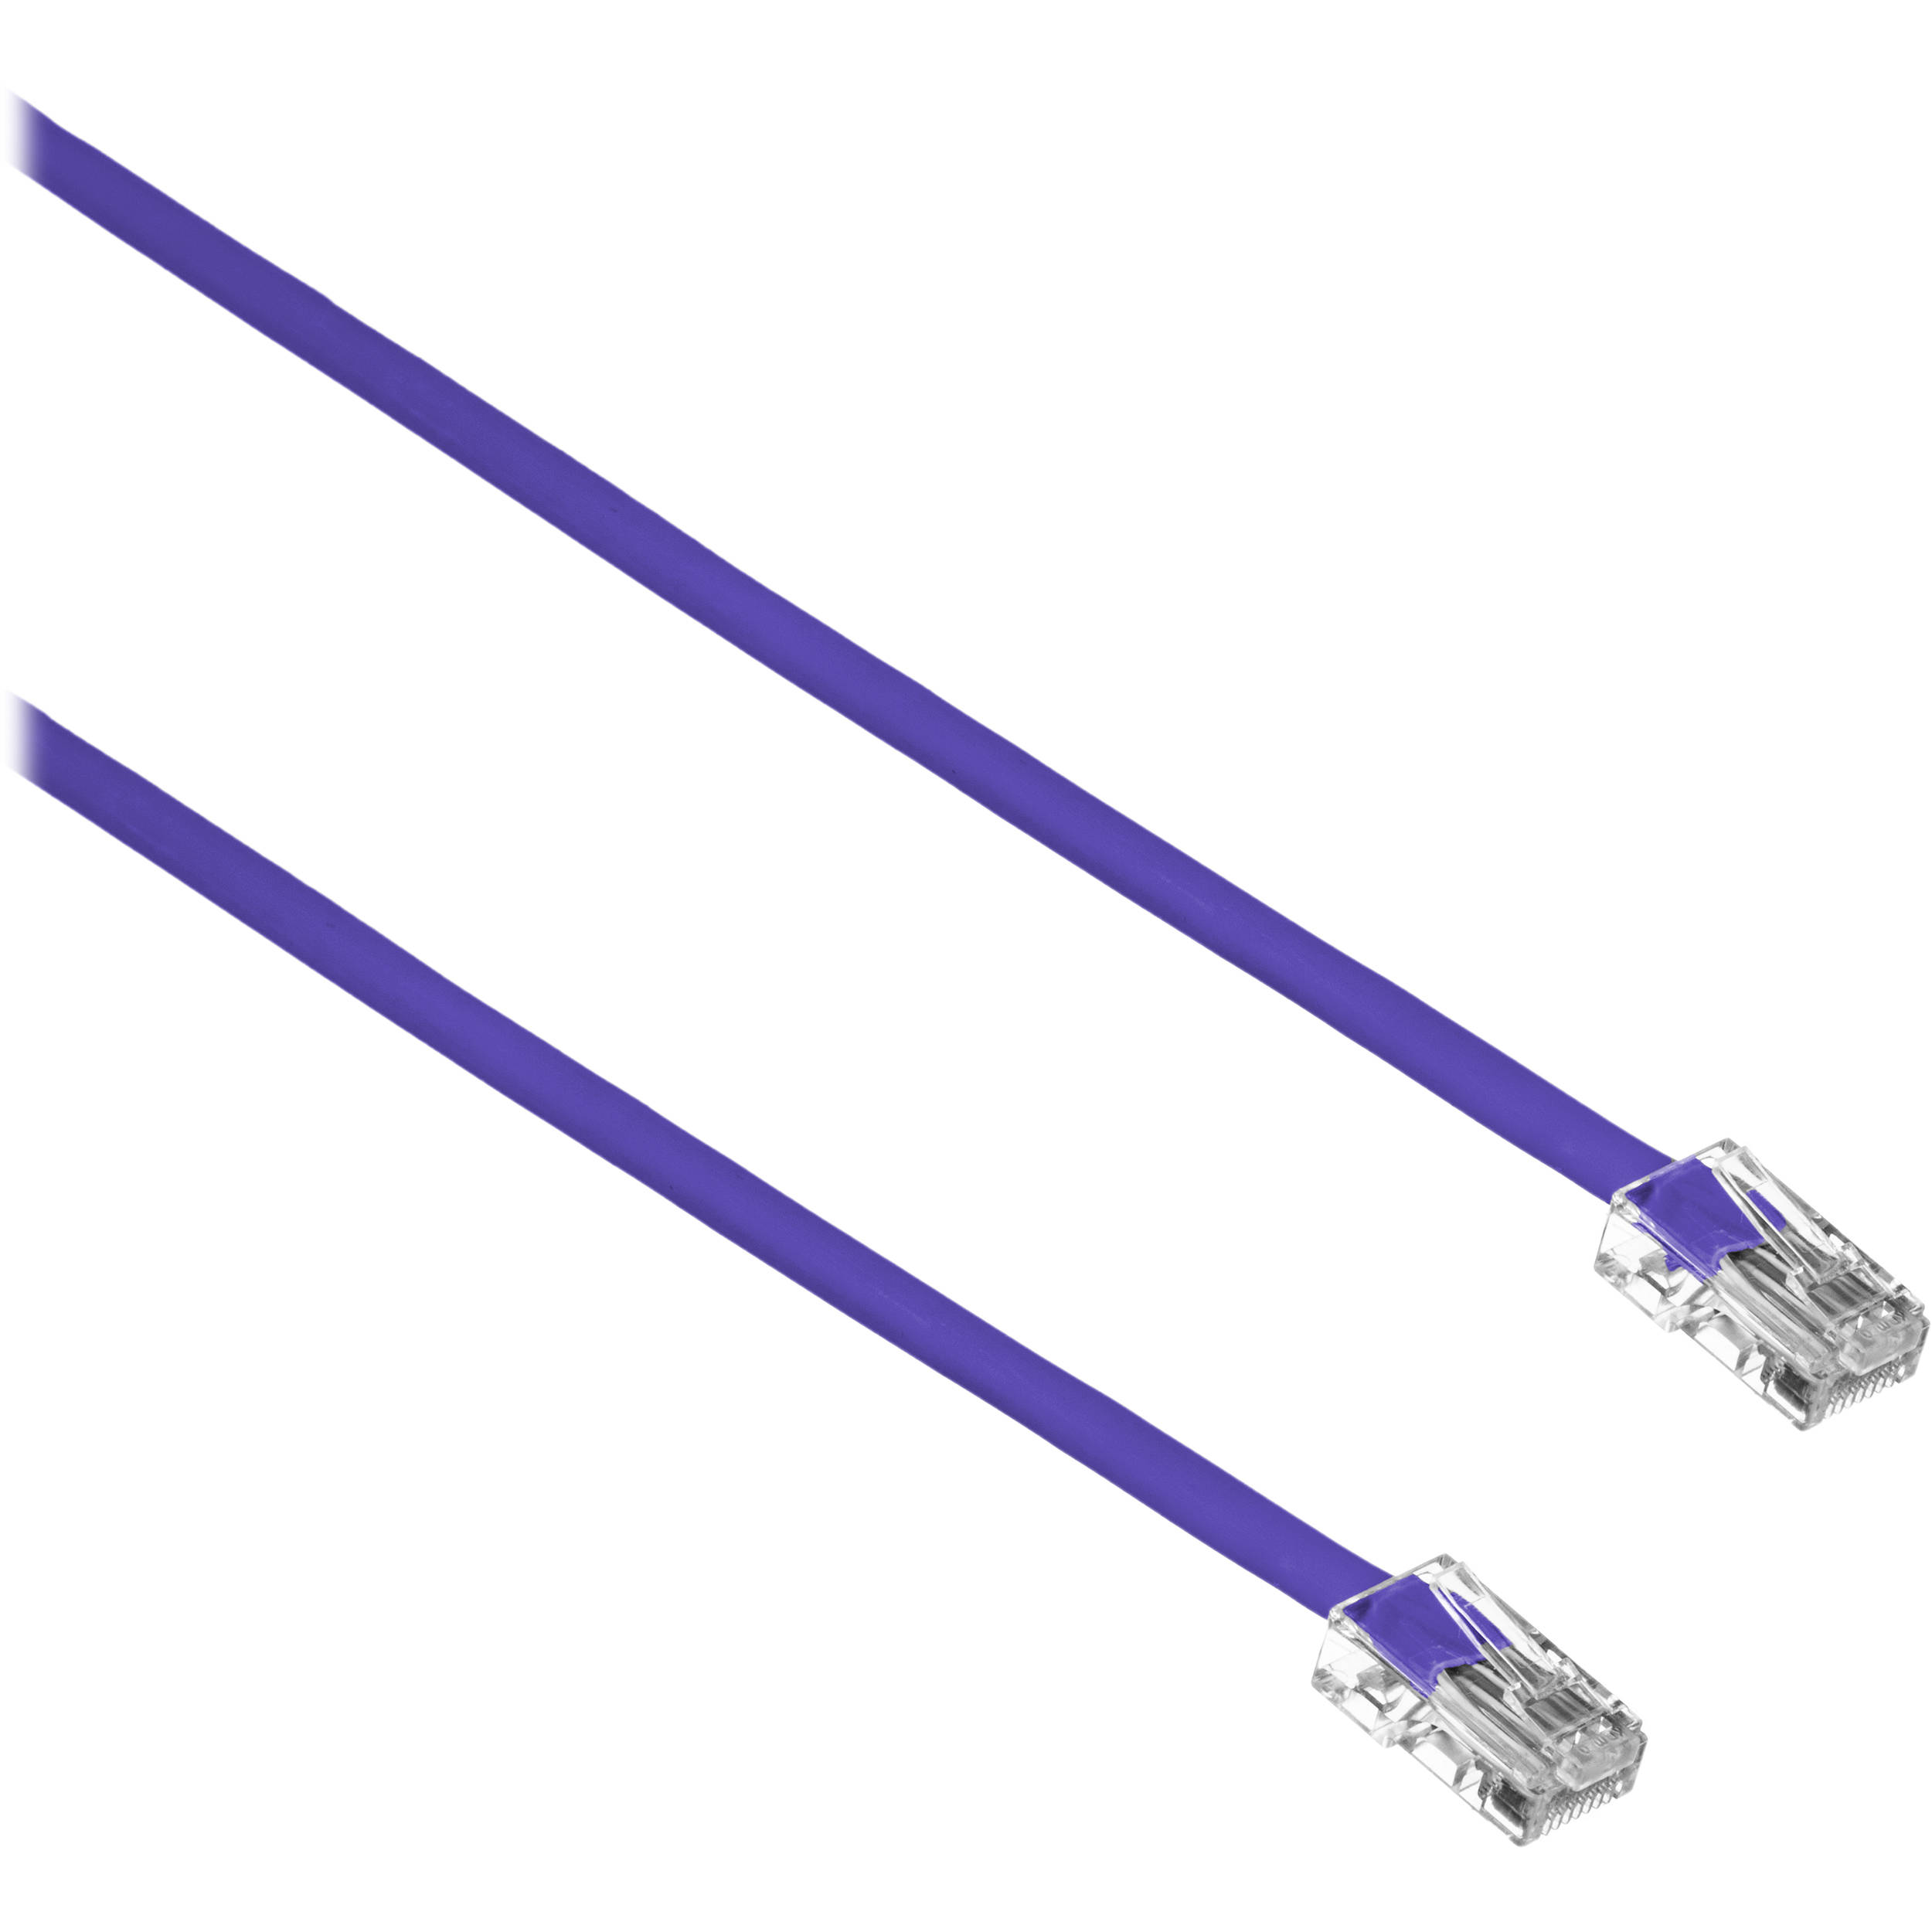 Comprehensive CAT5e 350 MHz Assembly Cable (5 feet, Purple)